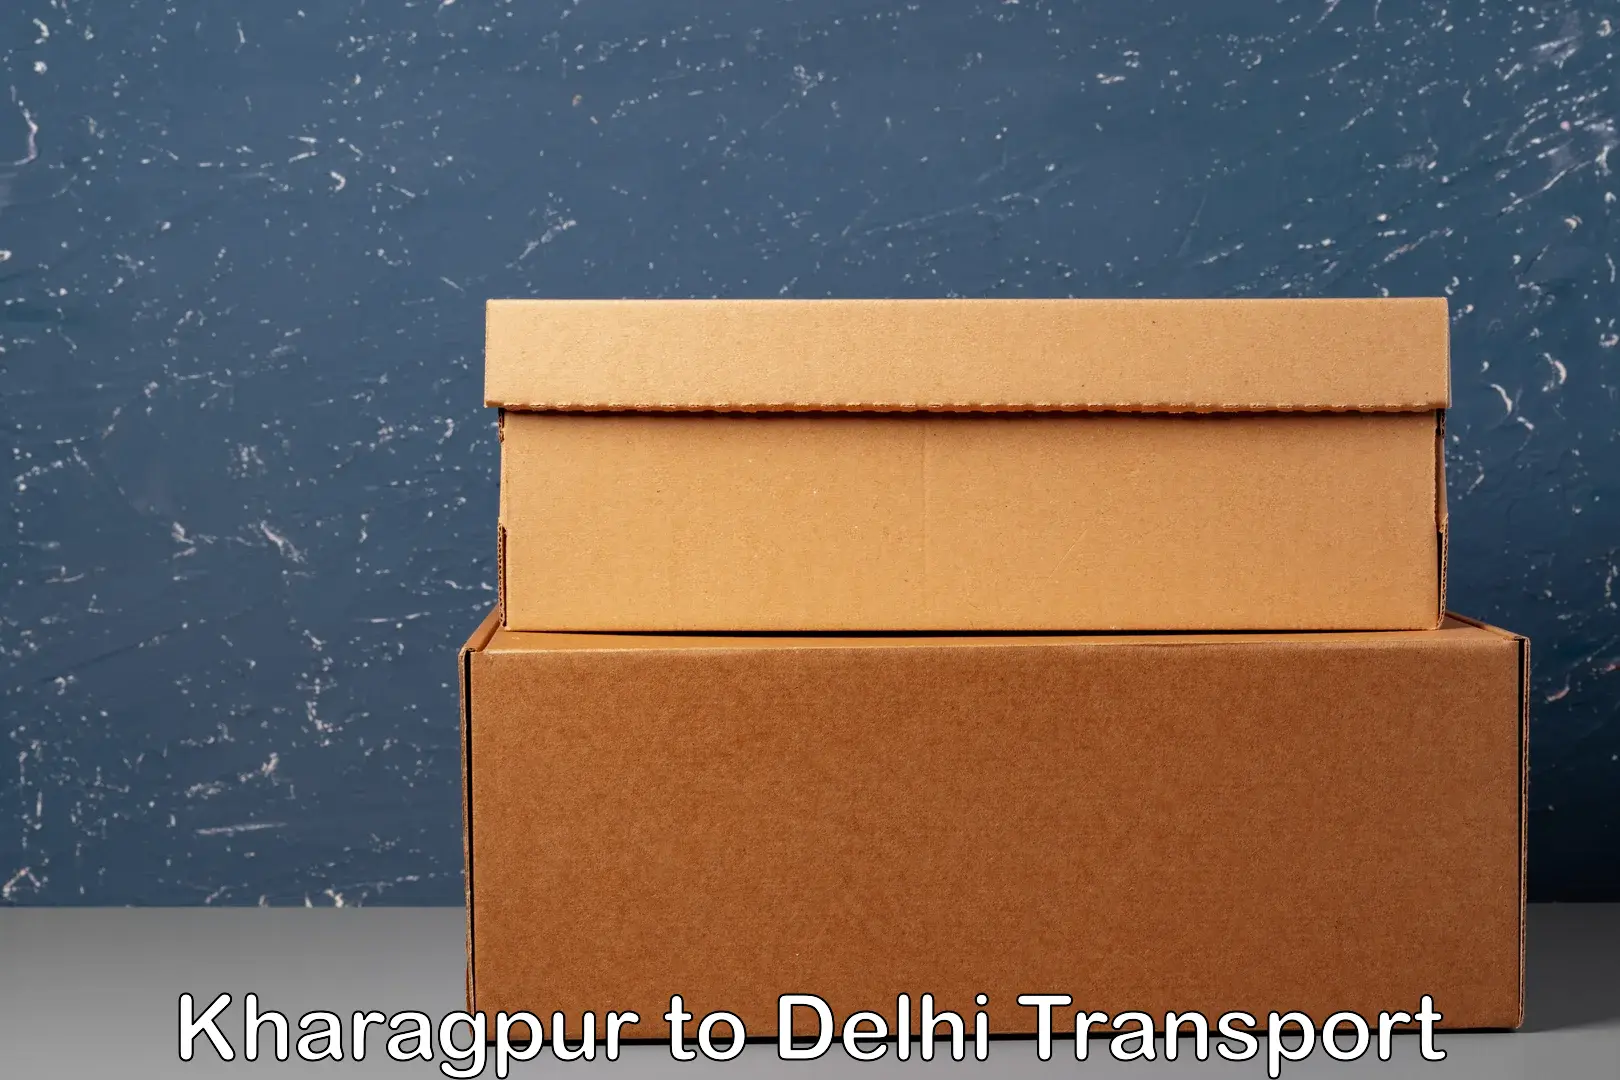 Nearby transport service Kharagpur to IIT Delhi